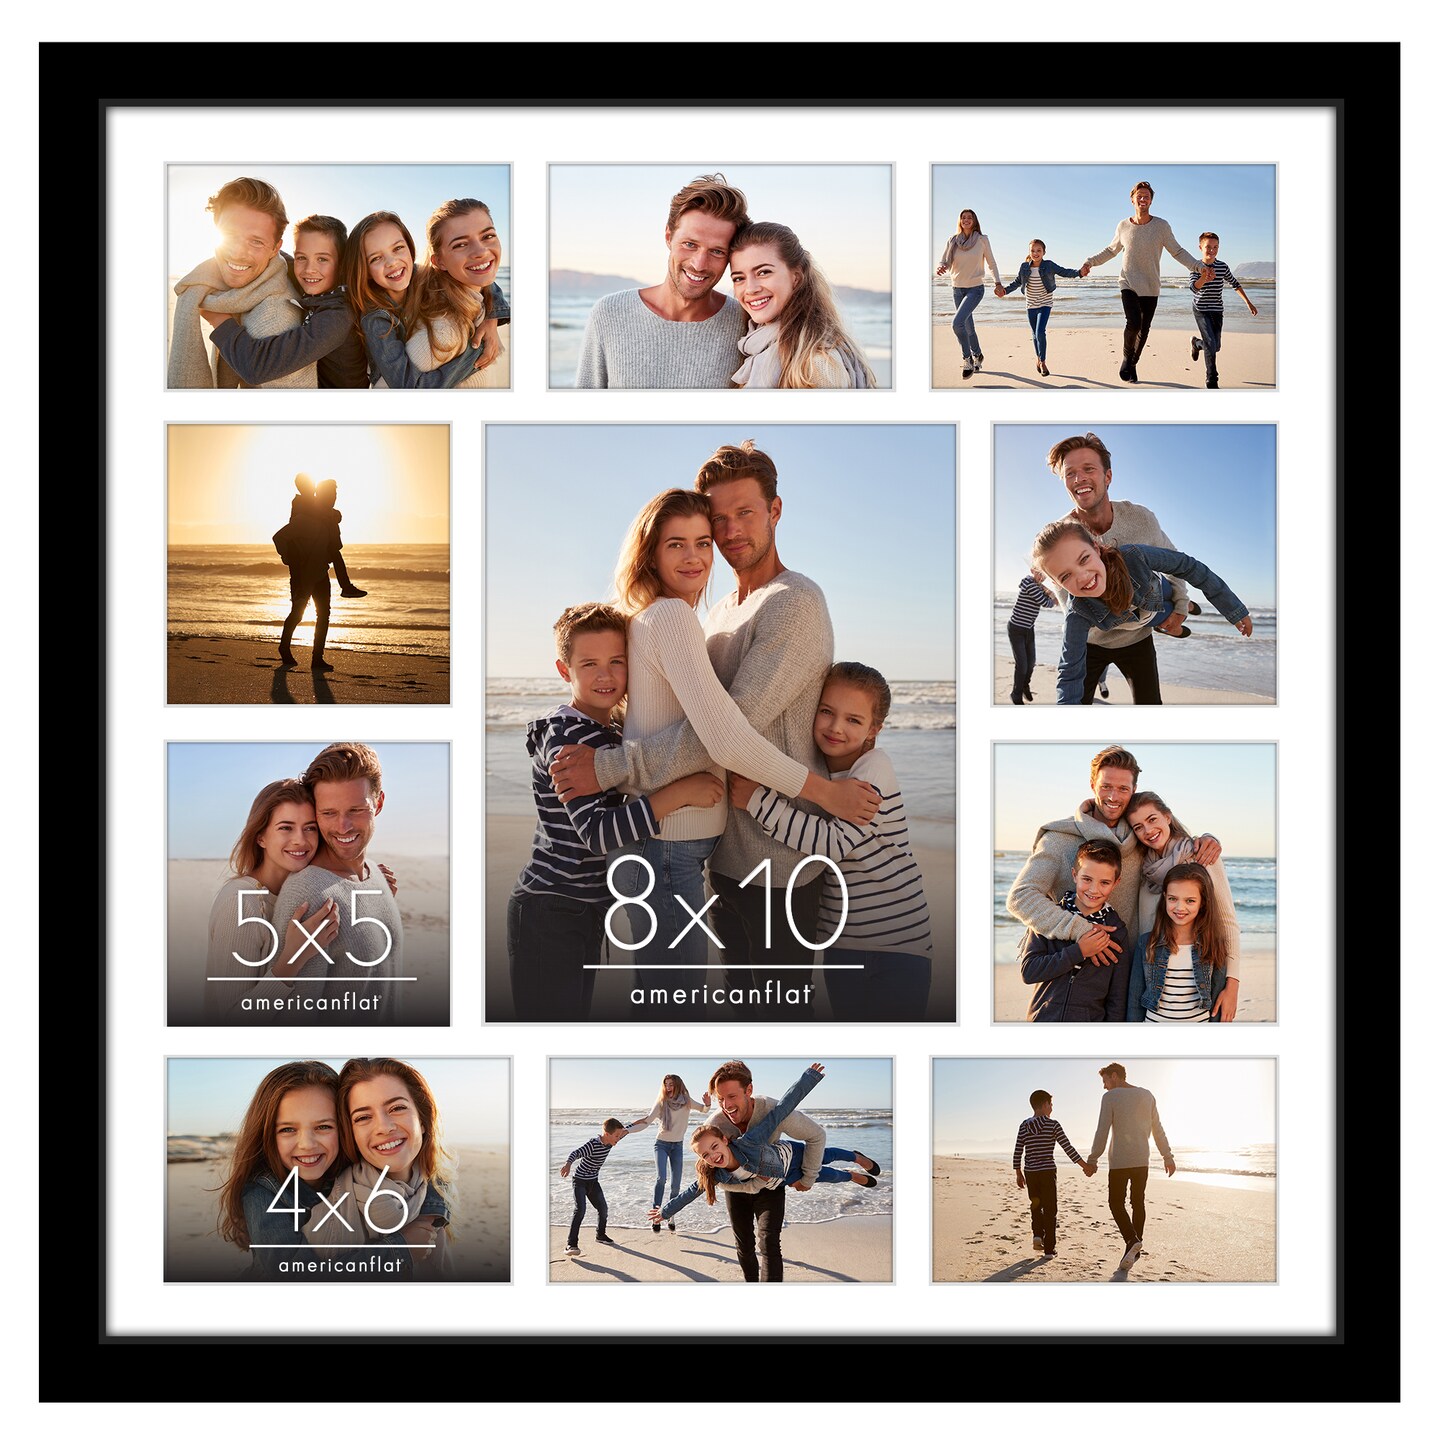 Americanflat 20x20 Collage Picture Frame - Fits One 8x10, Four 5x5, and Six 4x6 Photos or One 20x20 Photo